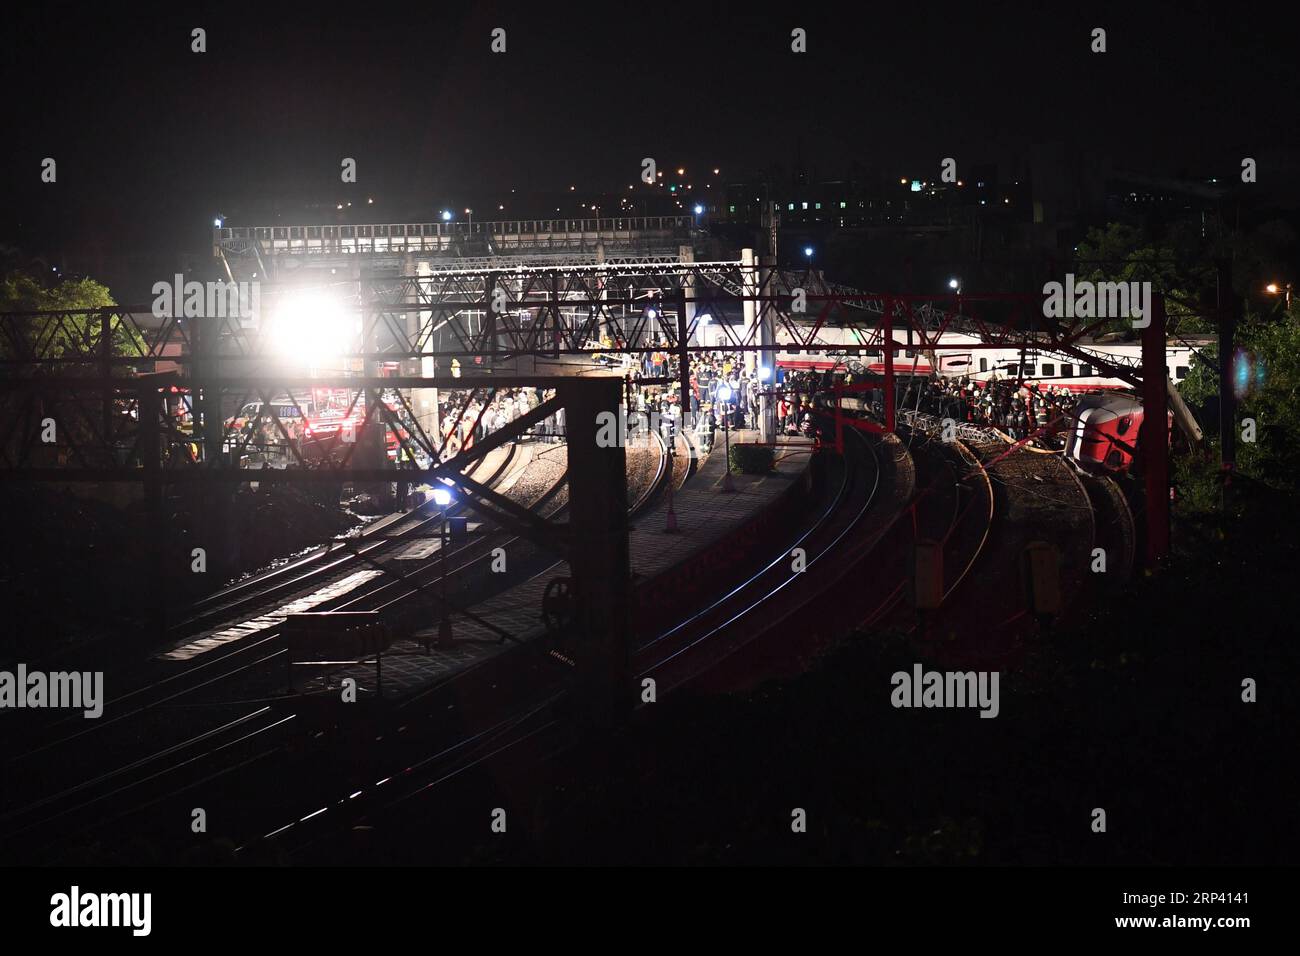 (181021) -- YILAN, Oct. 21, 2018 -- Photo taken on Oct. 21, 2018 shows the train derailment site in Yilan County, southeast China s Taiwan. At least 17 people died and another 120 injured as of 7 p.m. Sunday local time, after a passenger train derailed in Taiwan on Sunday afternoon, according to the island s railway authority. The Puyuma Express No. 6432 bound for Taitung from Shulin Station with 366 passengers on board derailed at 4:50 p.m. local time at Su aoxin Station in Yilan County. A total of 17 people were declared dead before being sent to hospital. Five of the eight cars of the expre Stock Photo